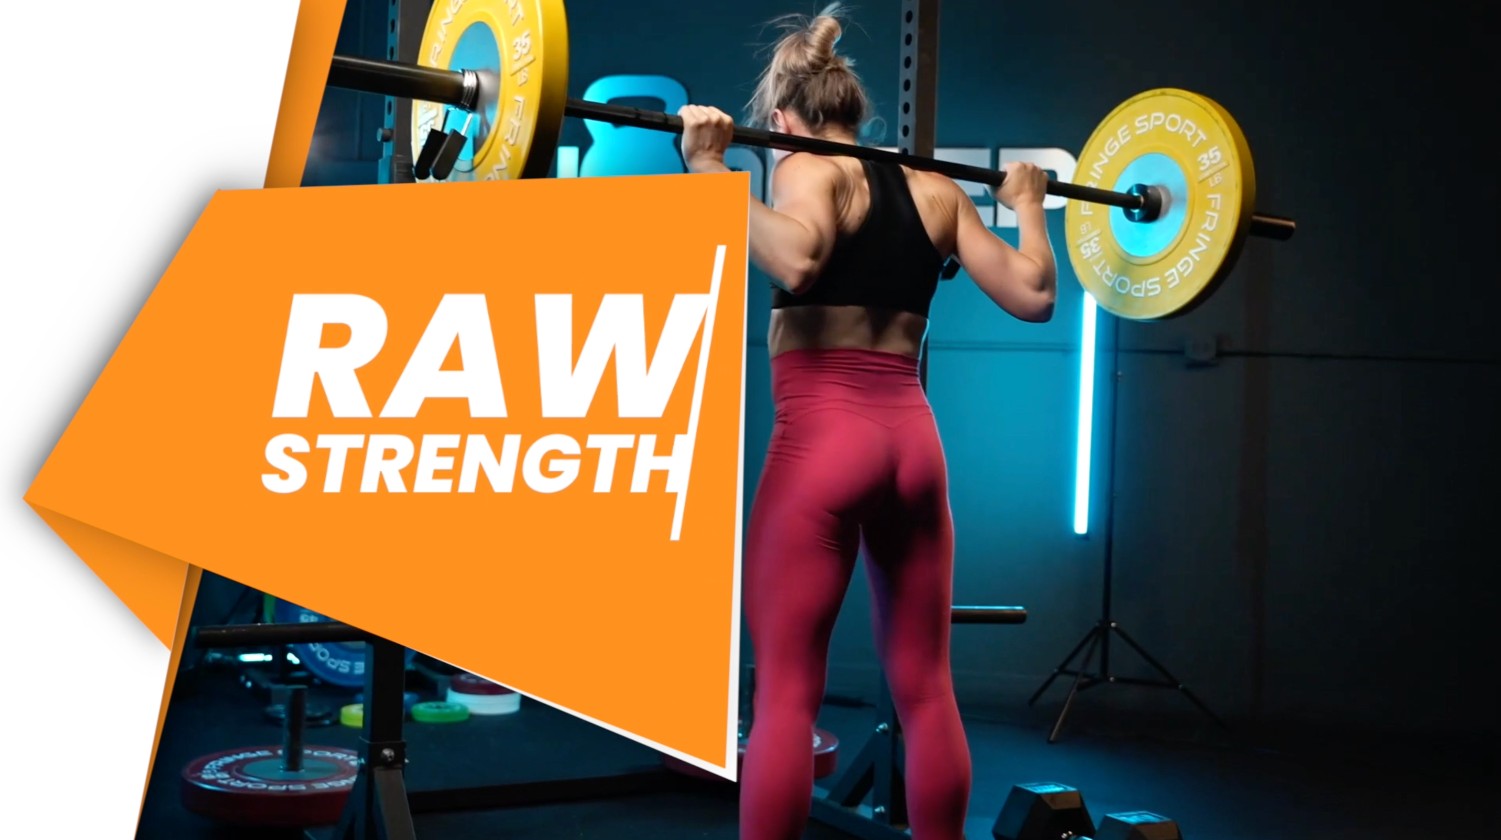 Learn how to GET STRONG with our brand new course, Raw Strength!